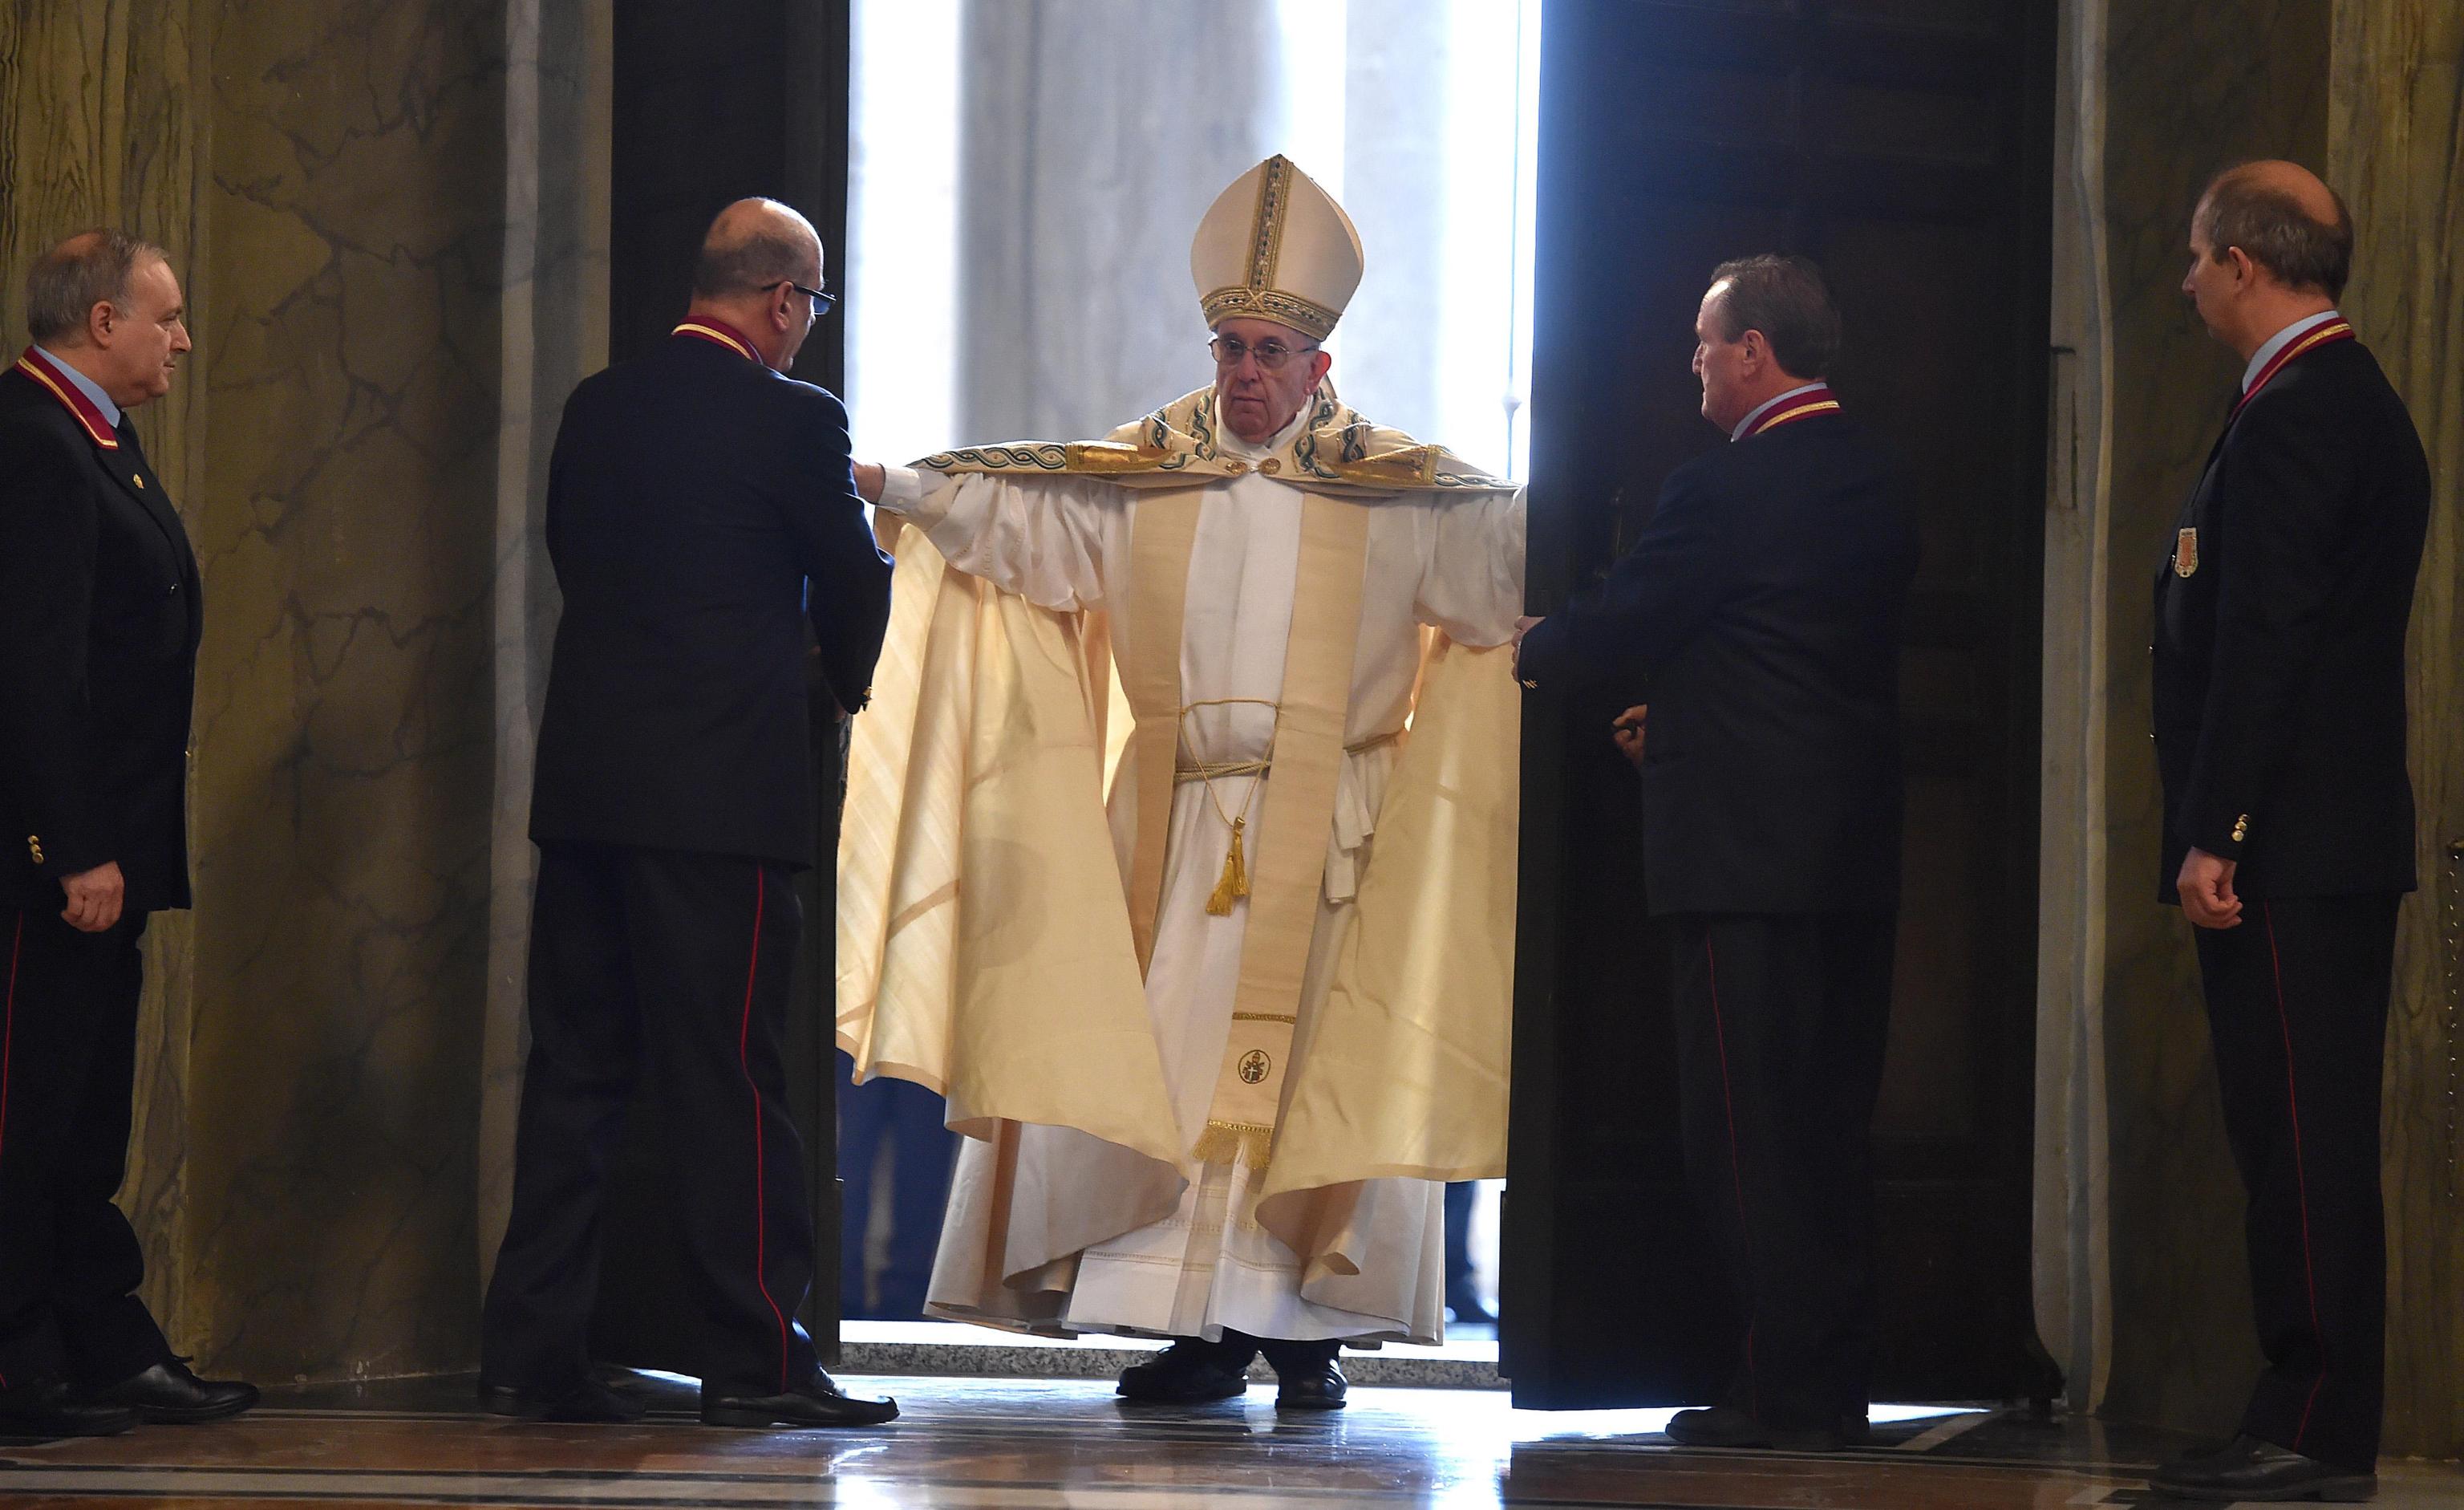 Pope Francis opens the Holy Door of Saint Peter's Basilica